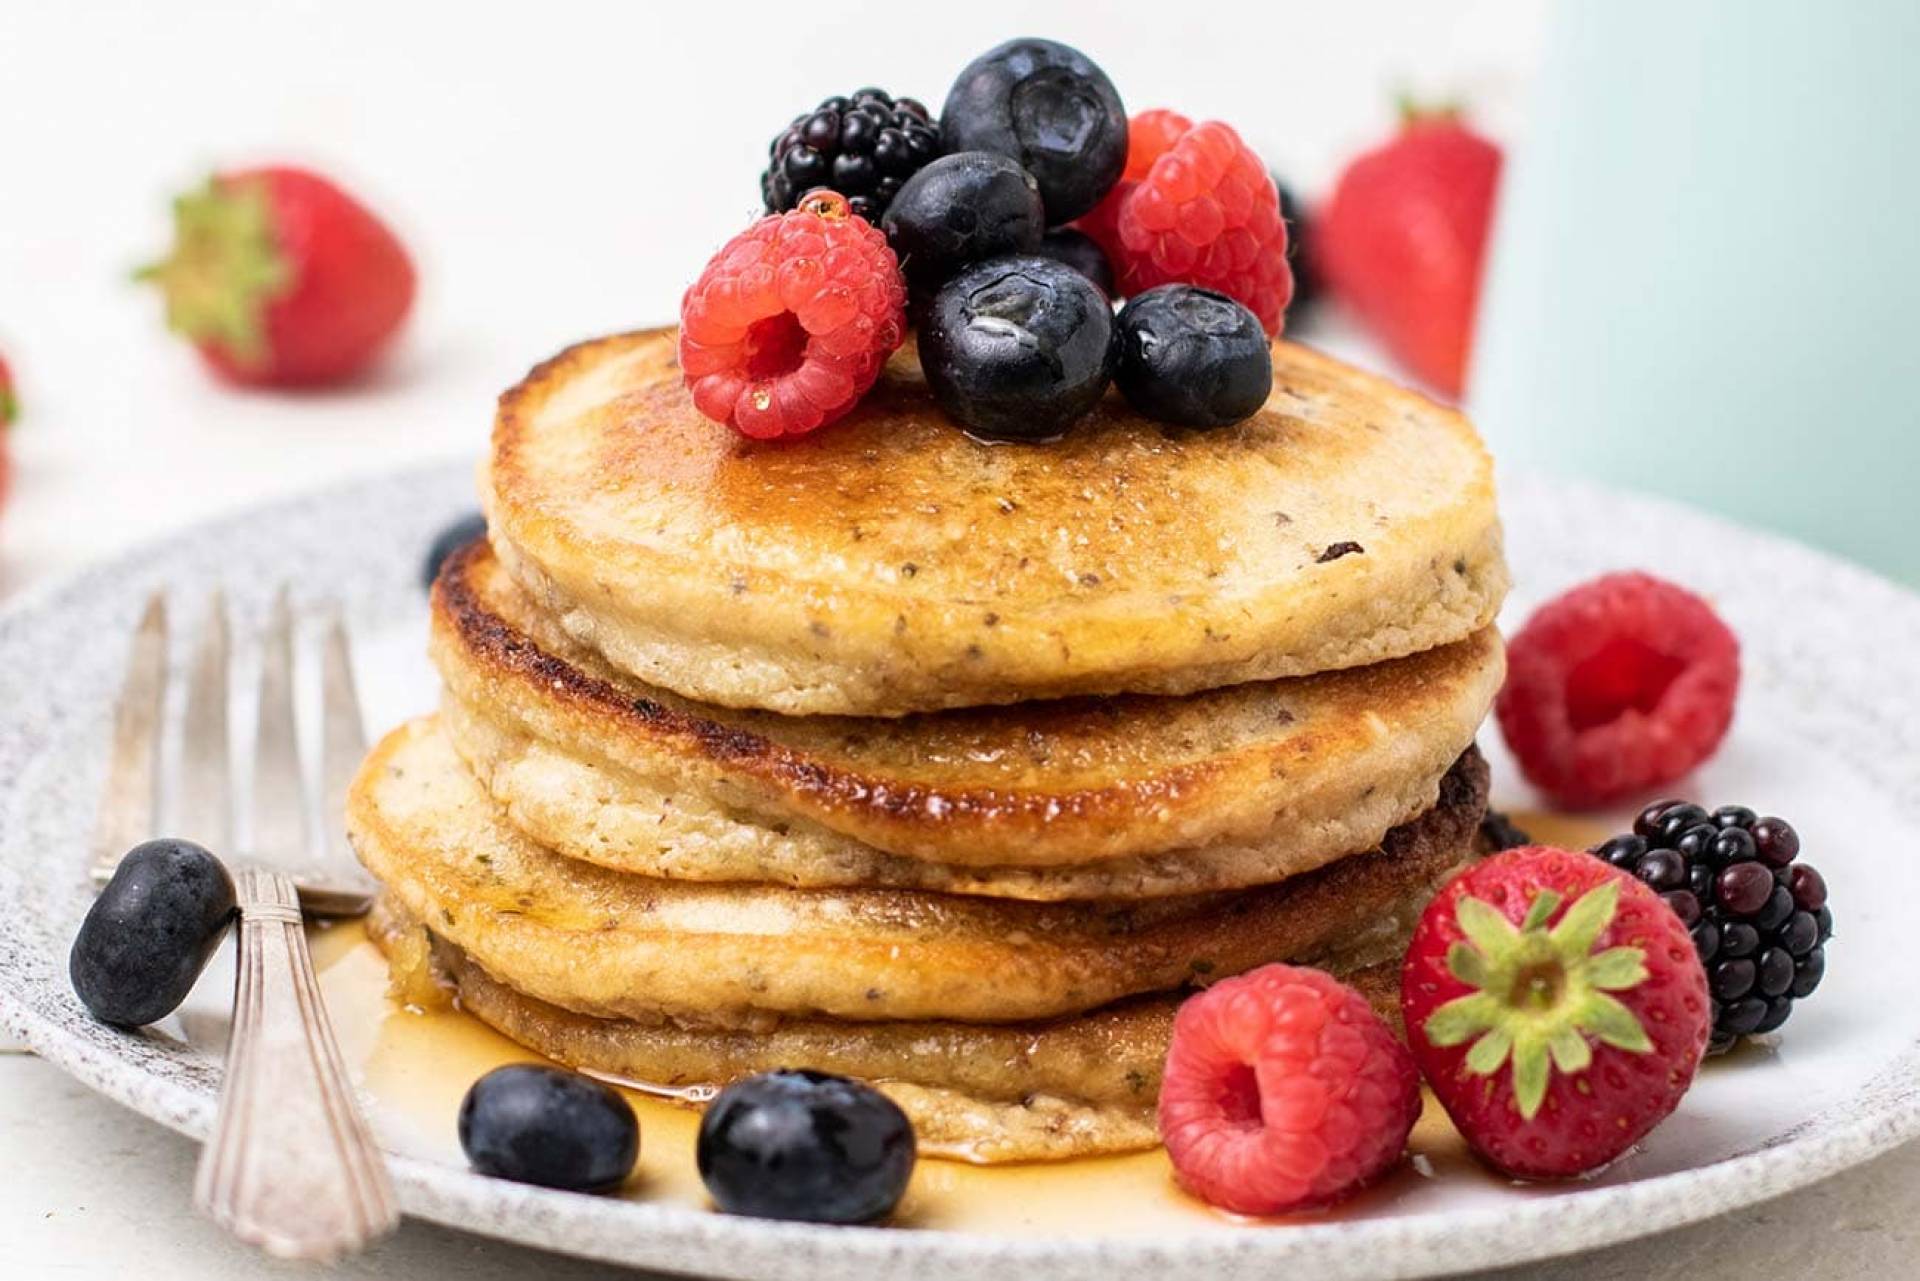 Keto Pancakes (Berries and Protein)